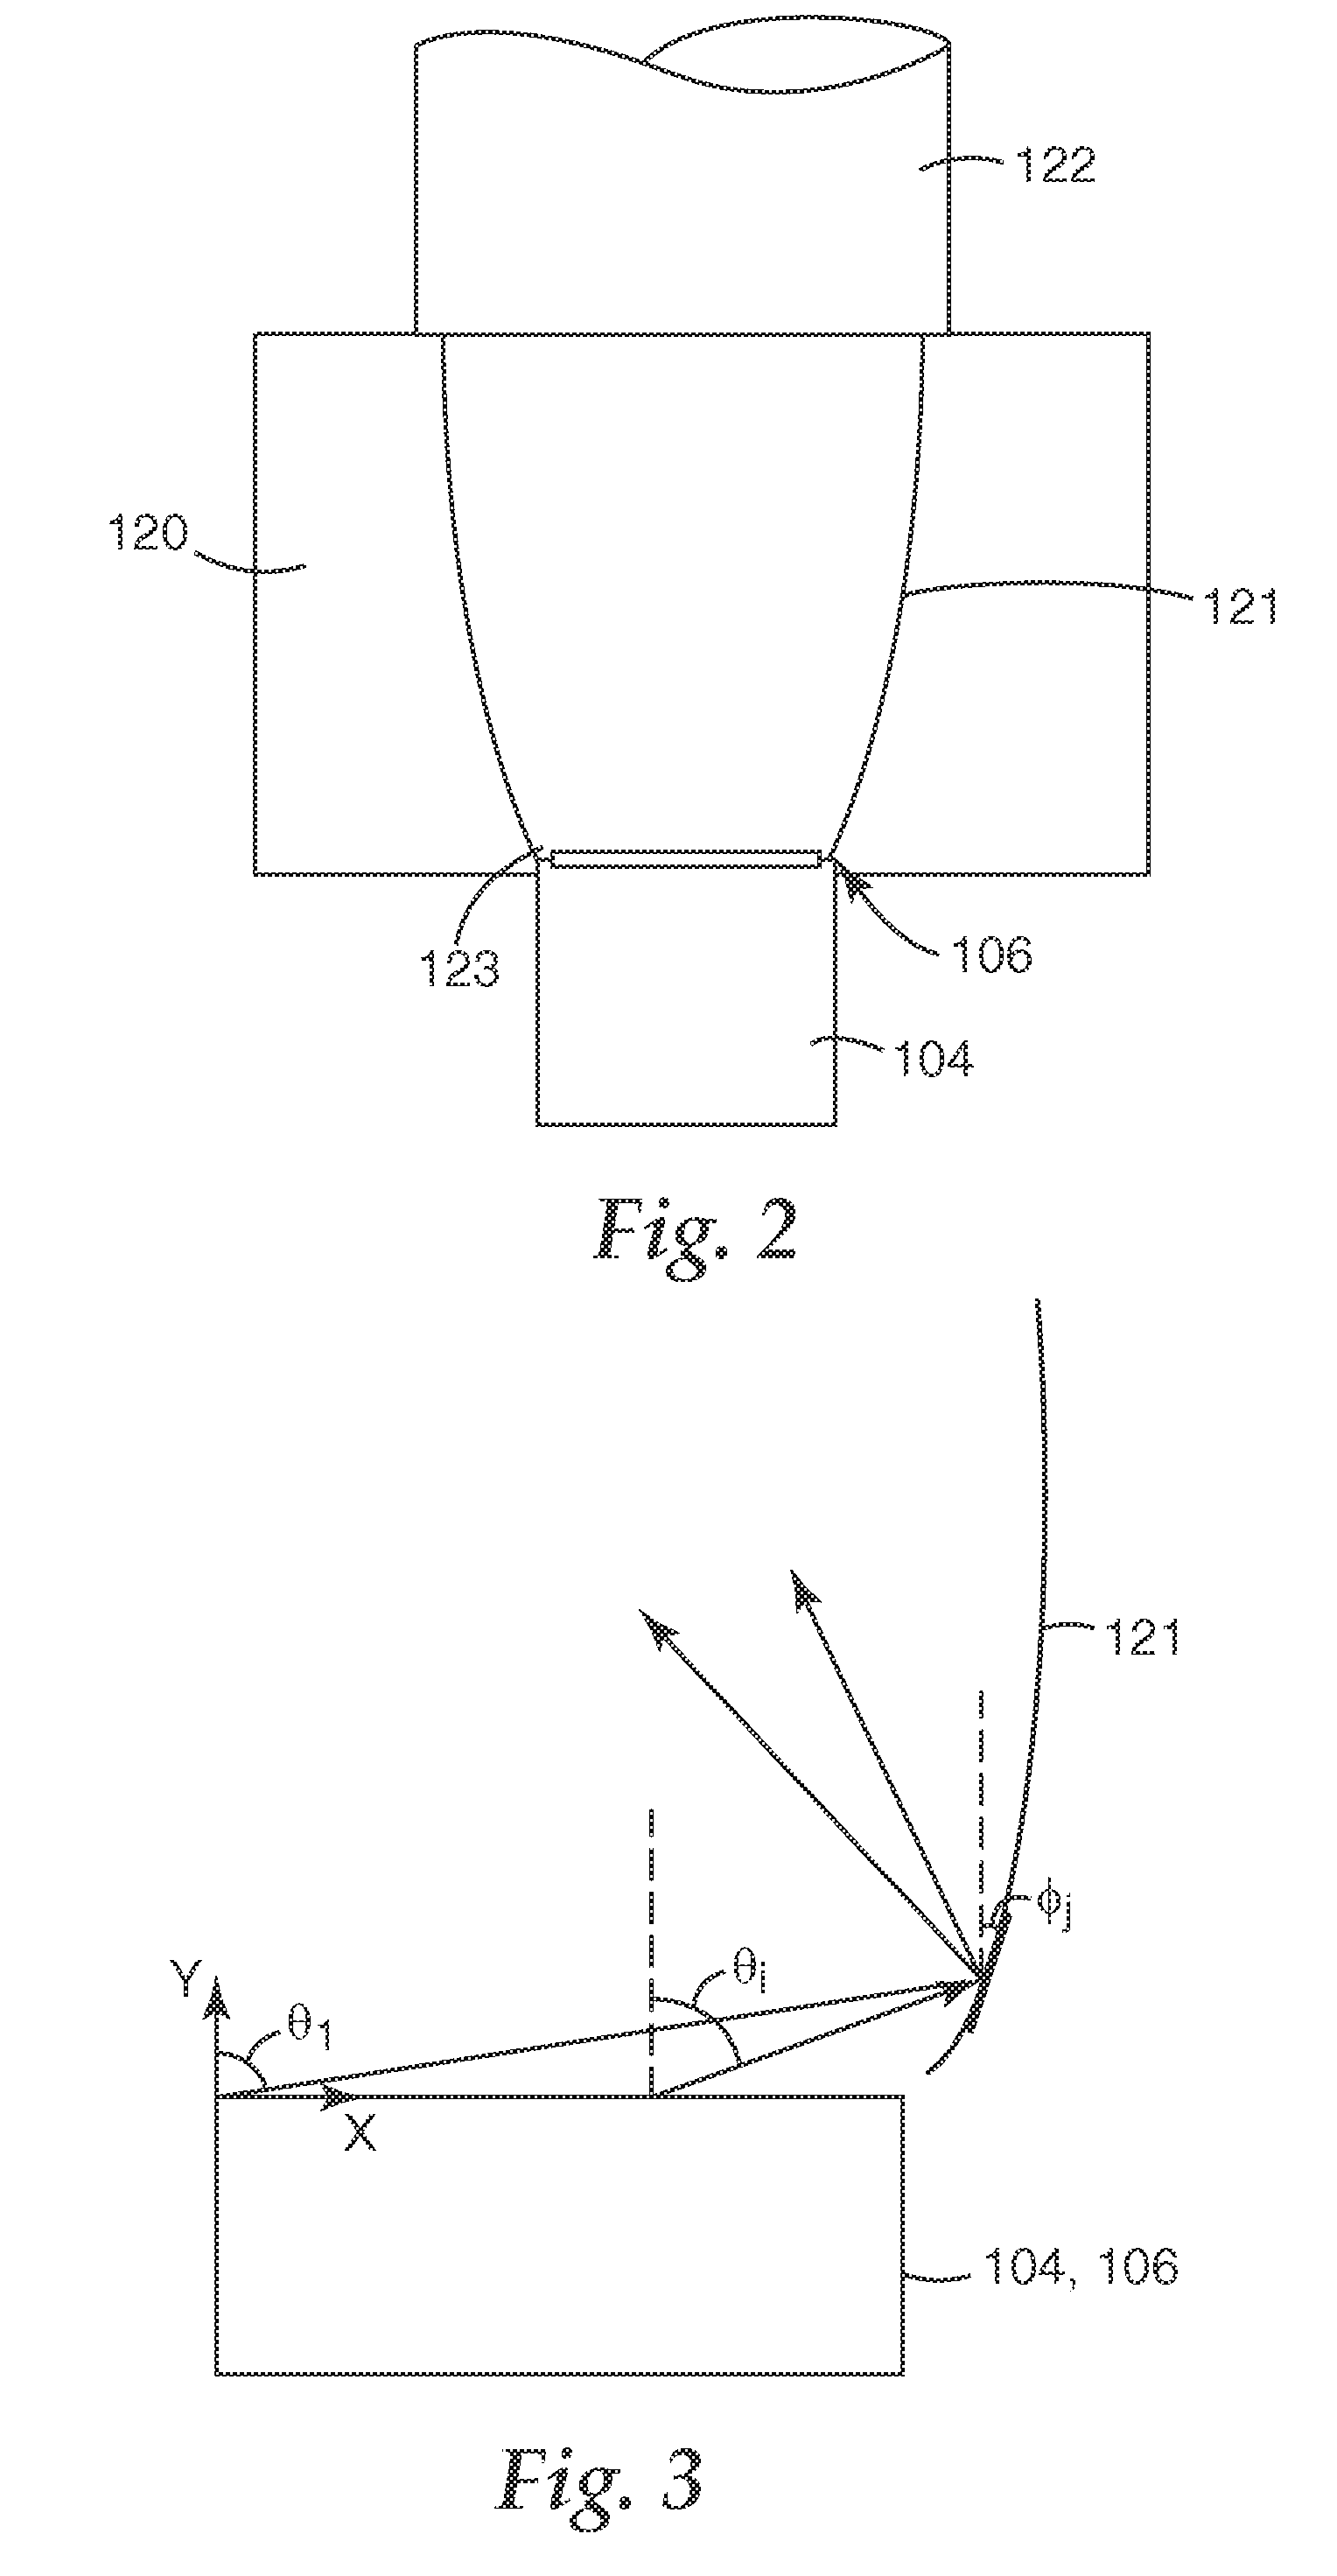 Illumination system using a plurality of light sources